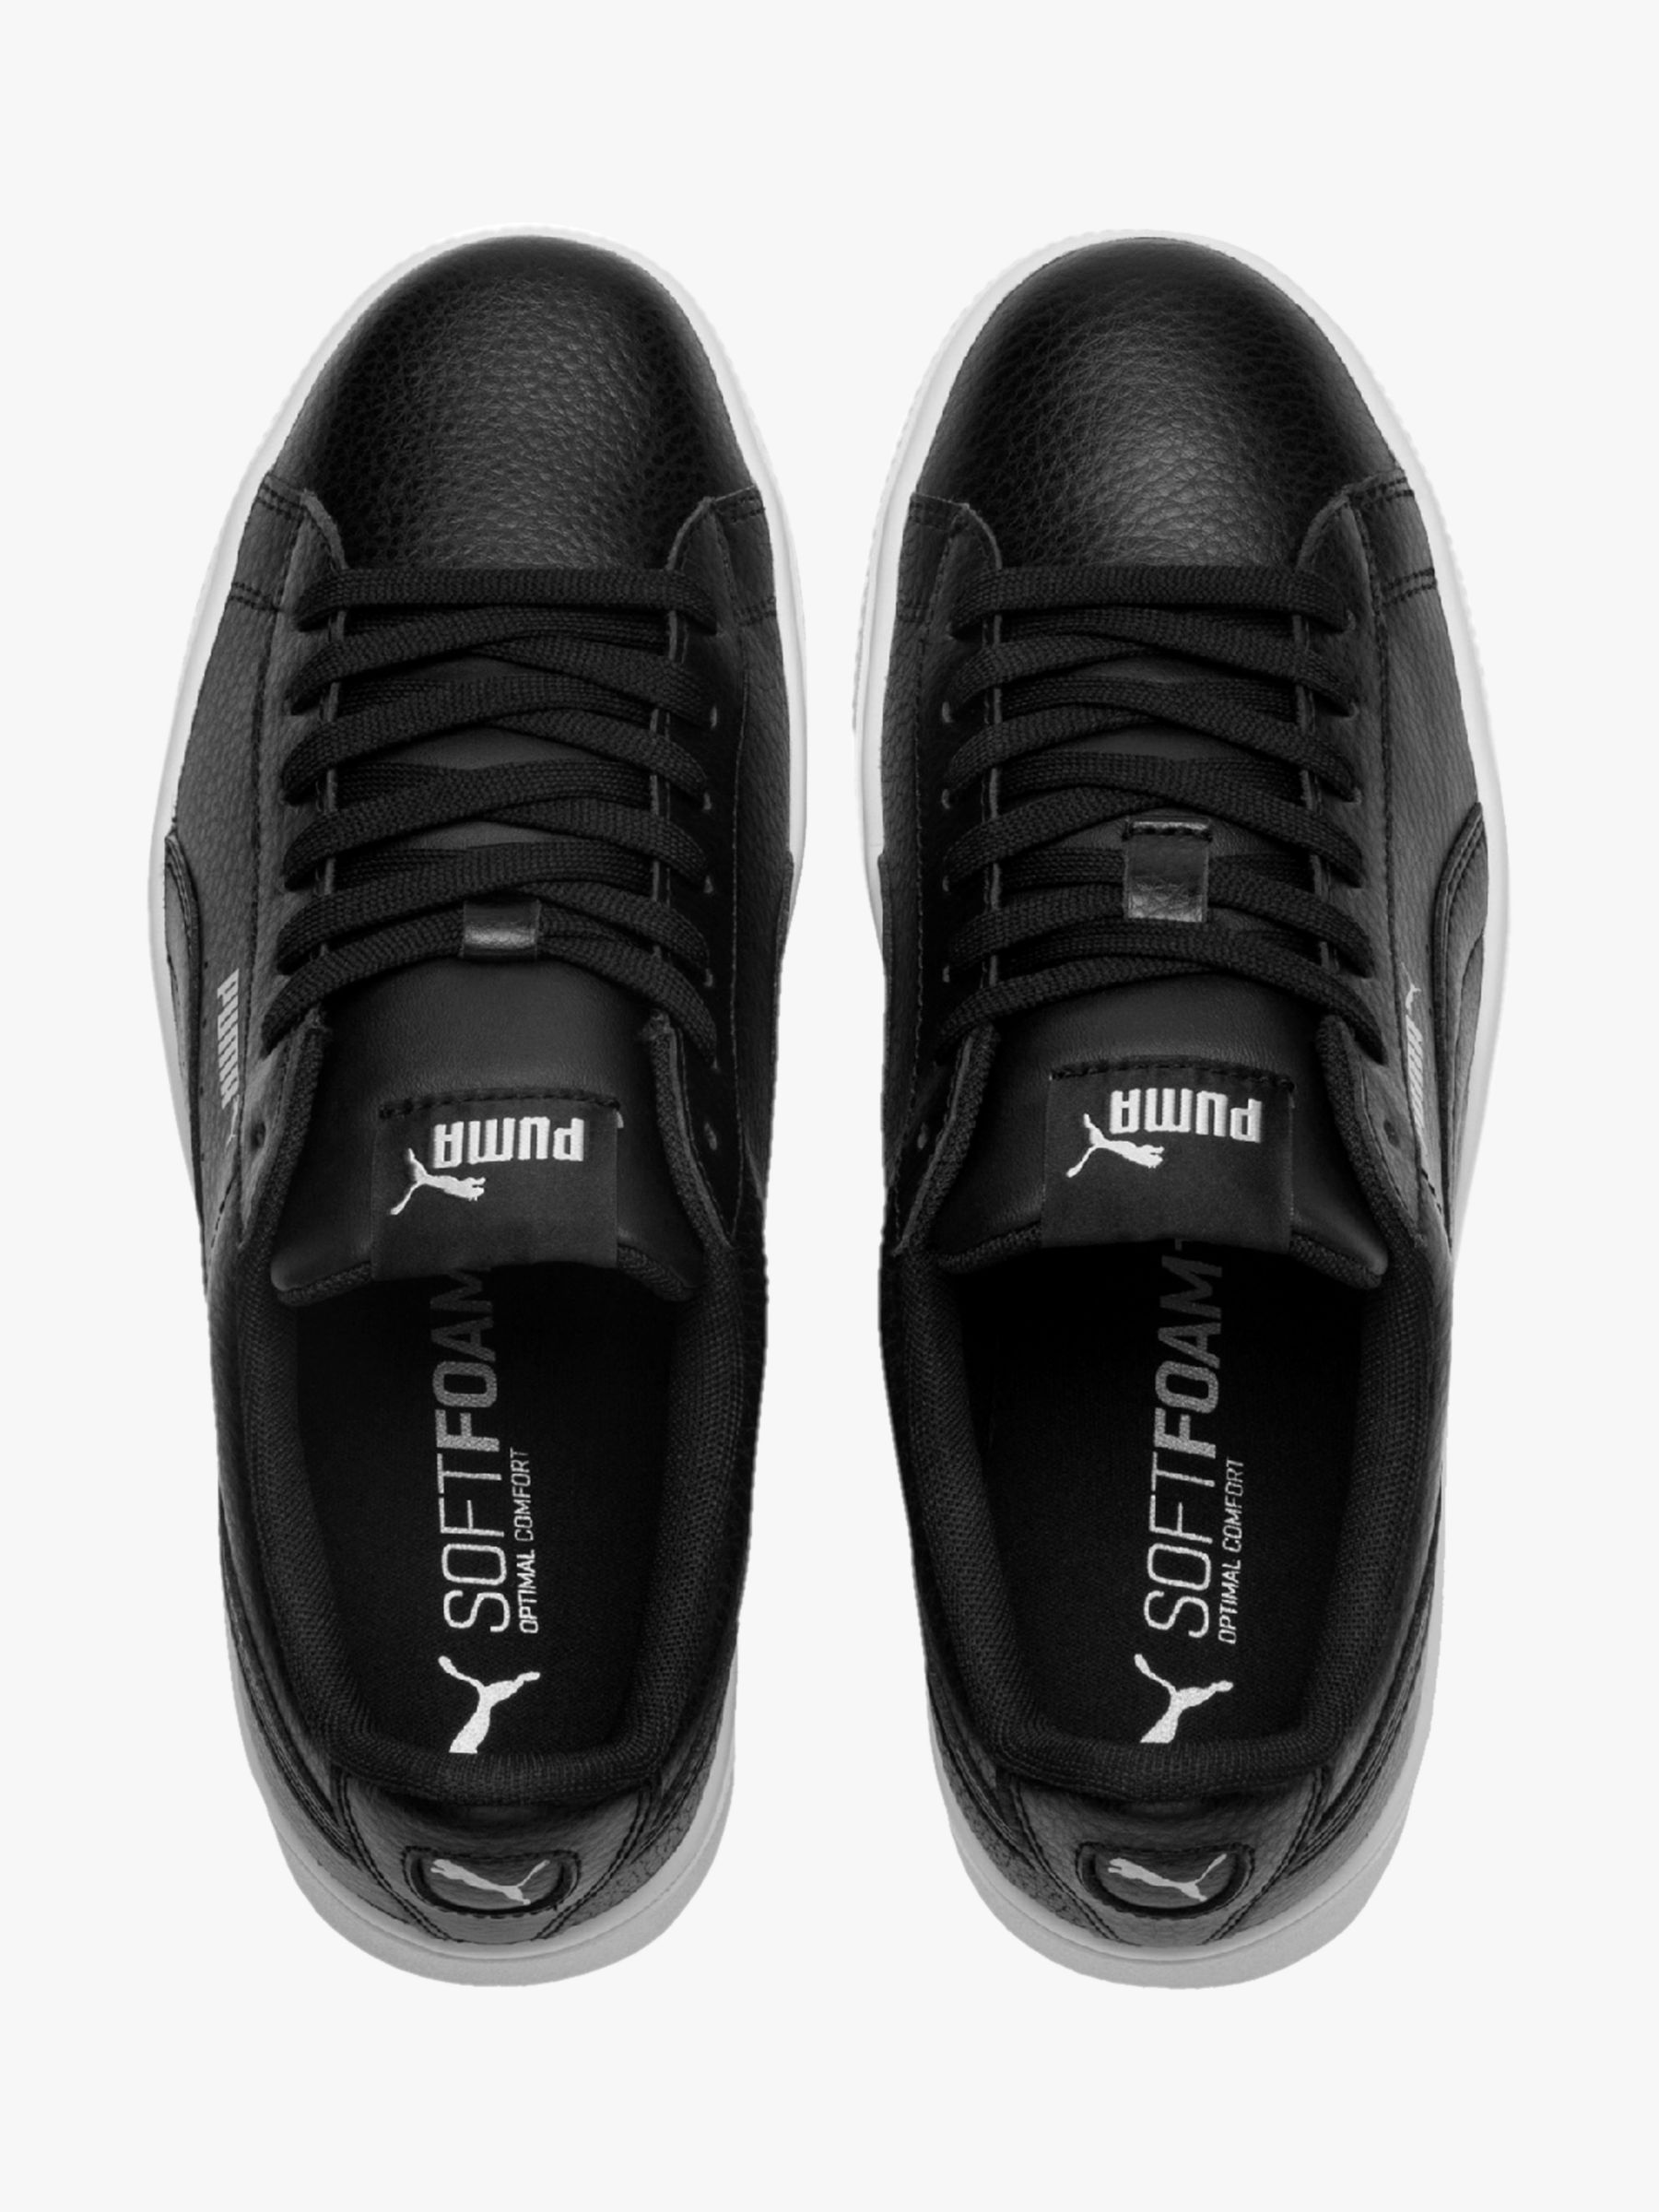 PUMA Vikky Stacked Women's Trainers, Black